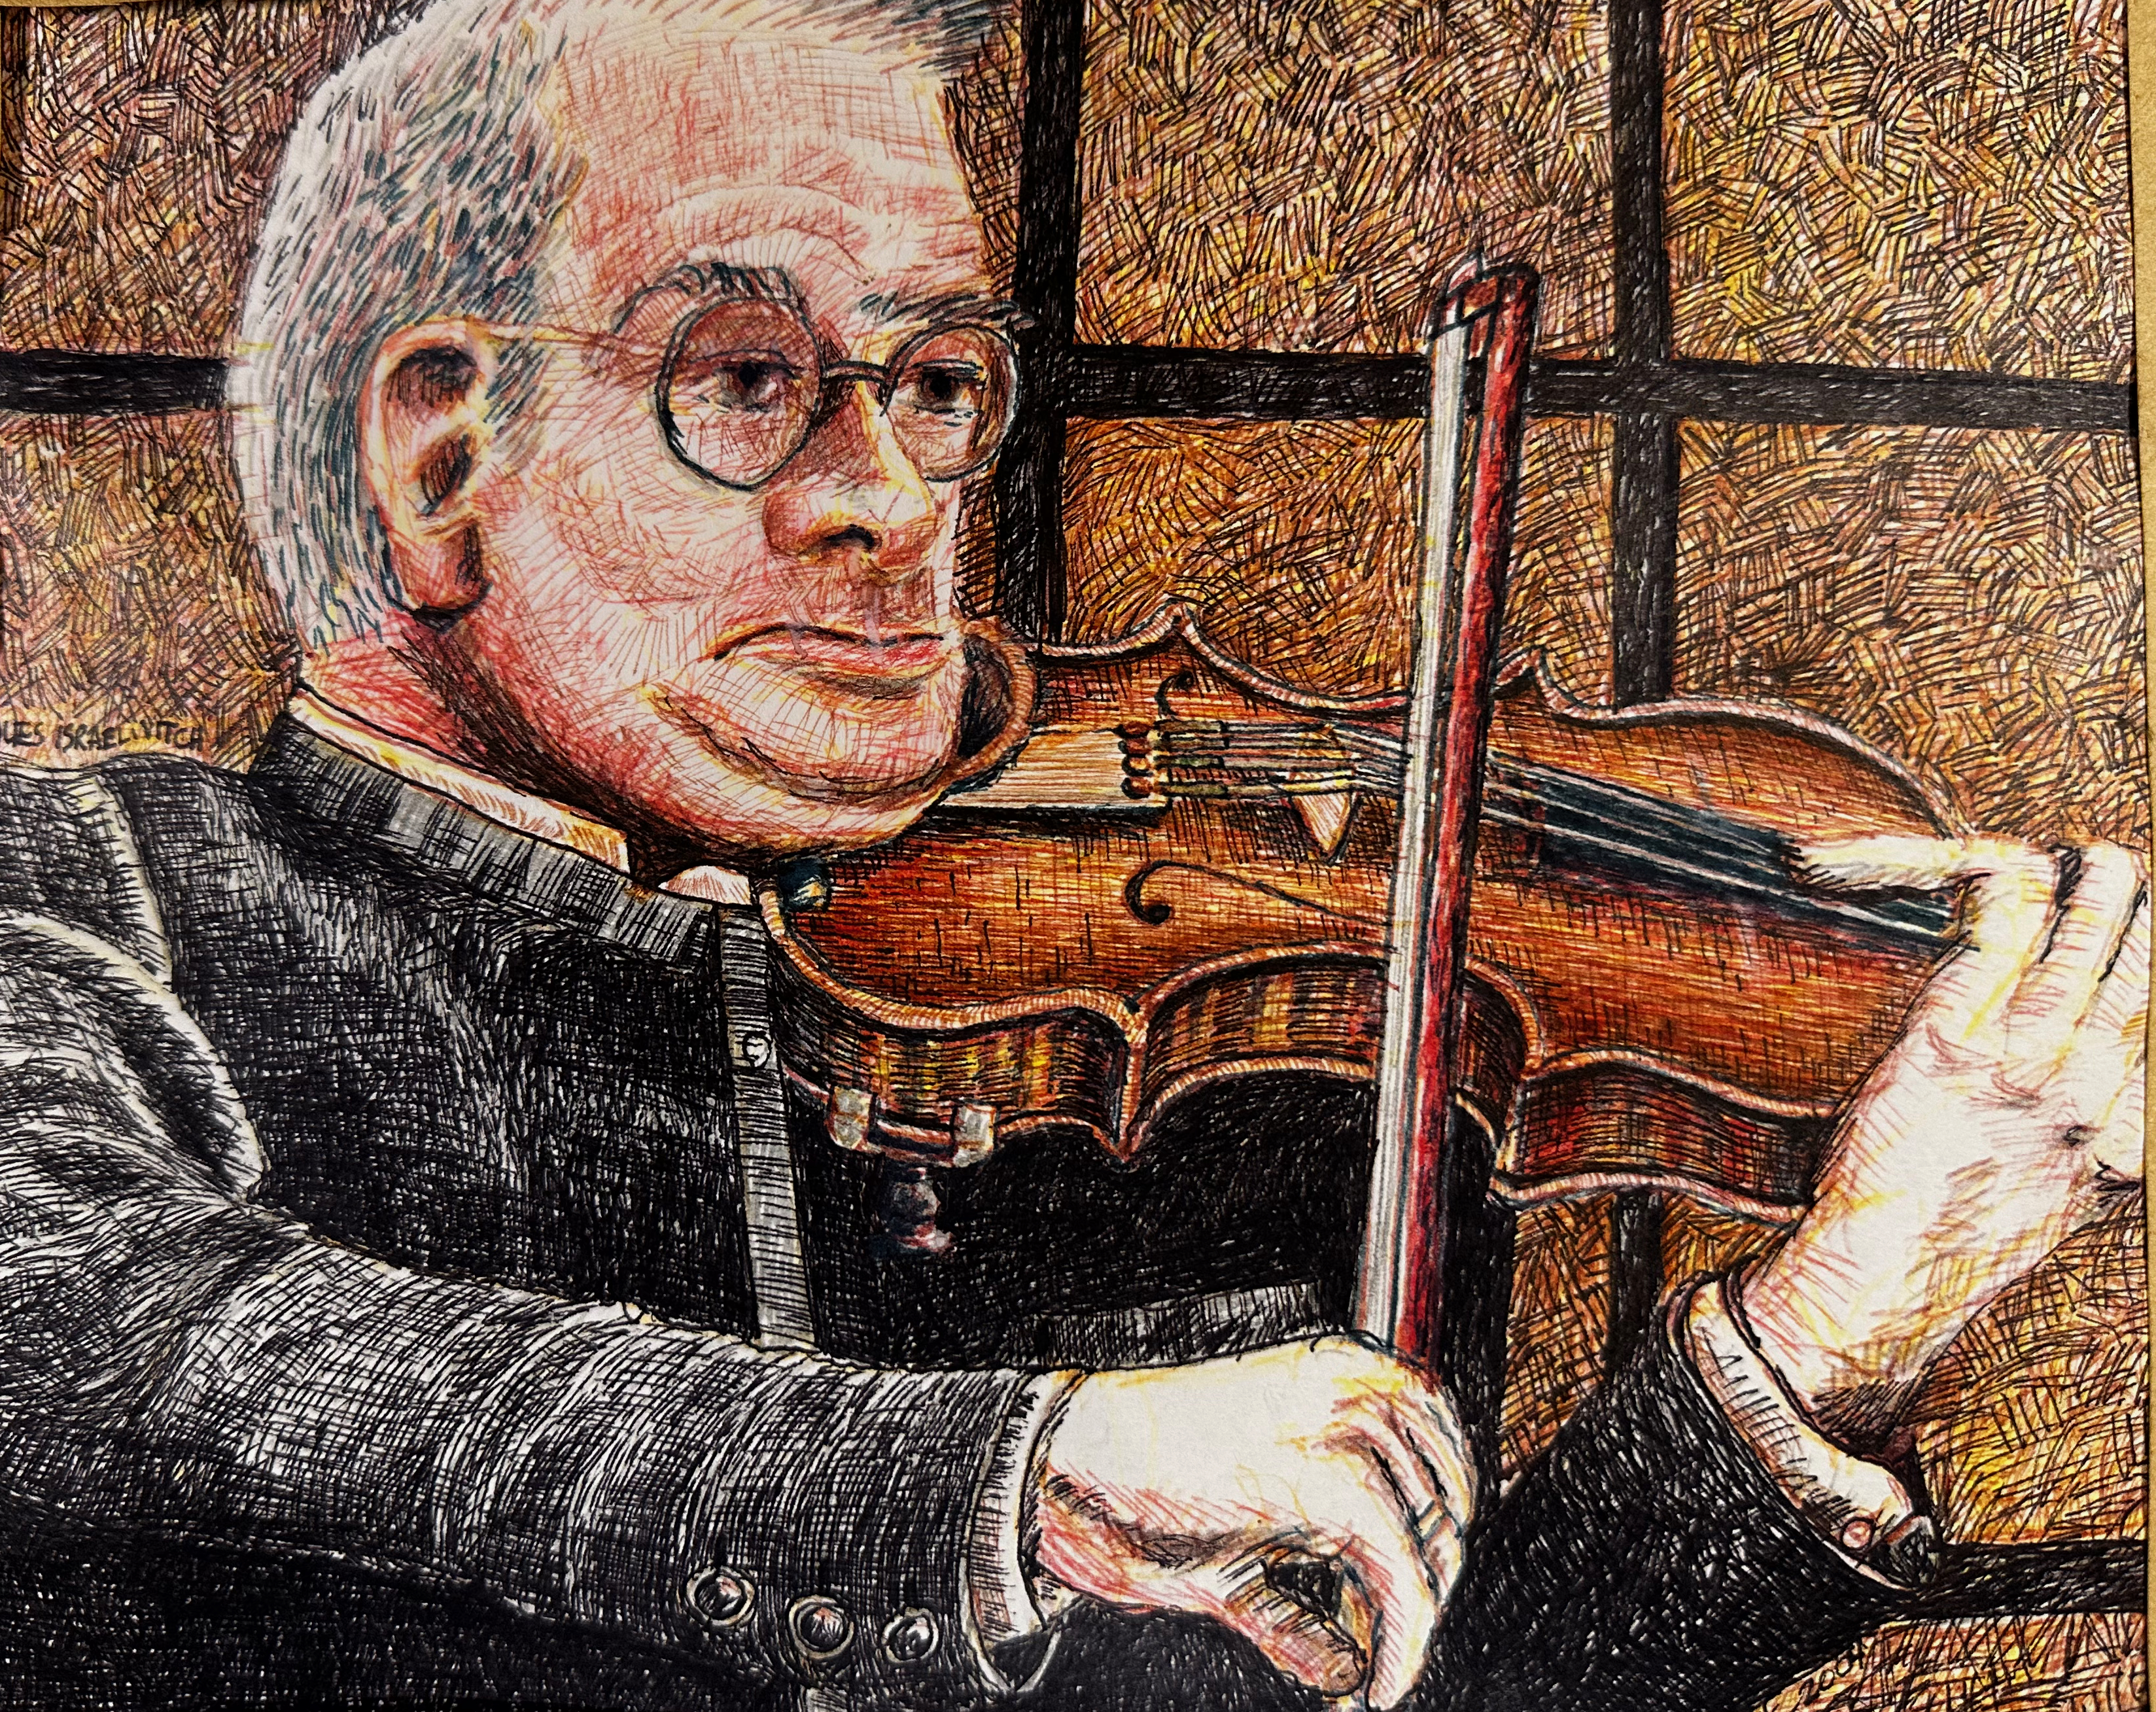 jacques-israelivitch-done-while-at-the-toronto-symphony-by-cork-ireland-freelance-artist-art-van-leewen